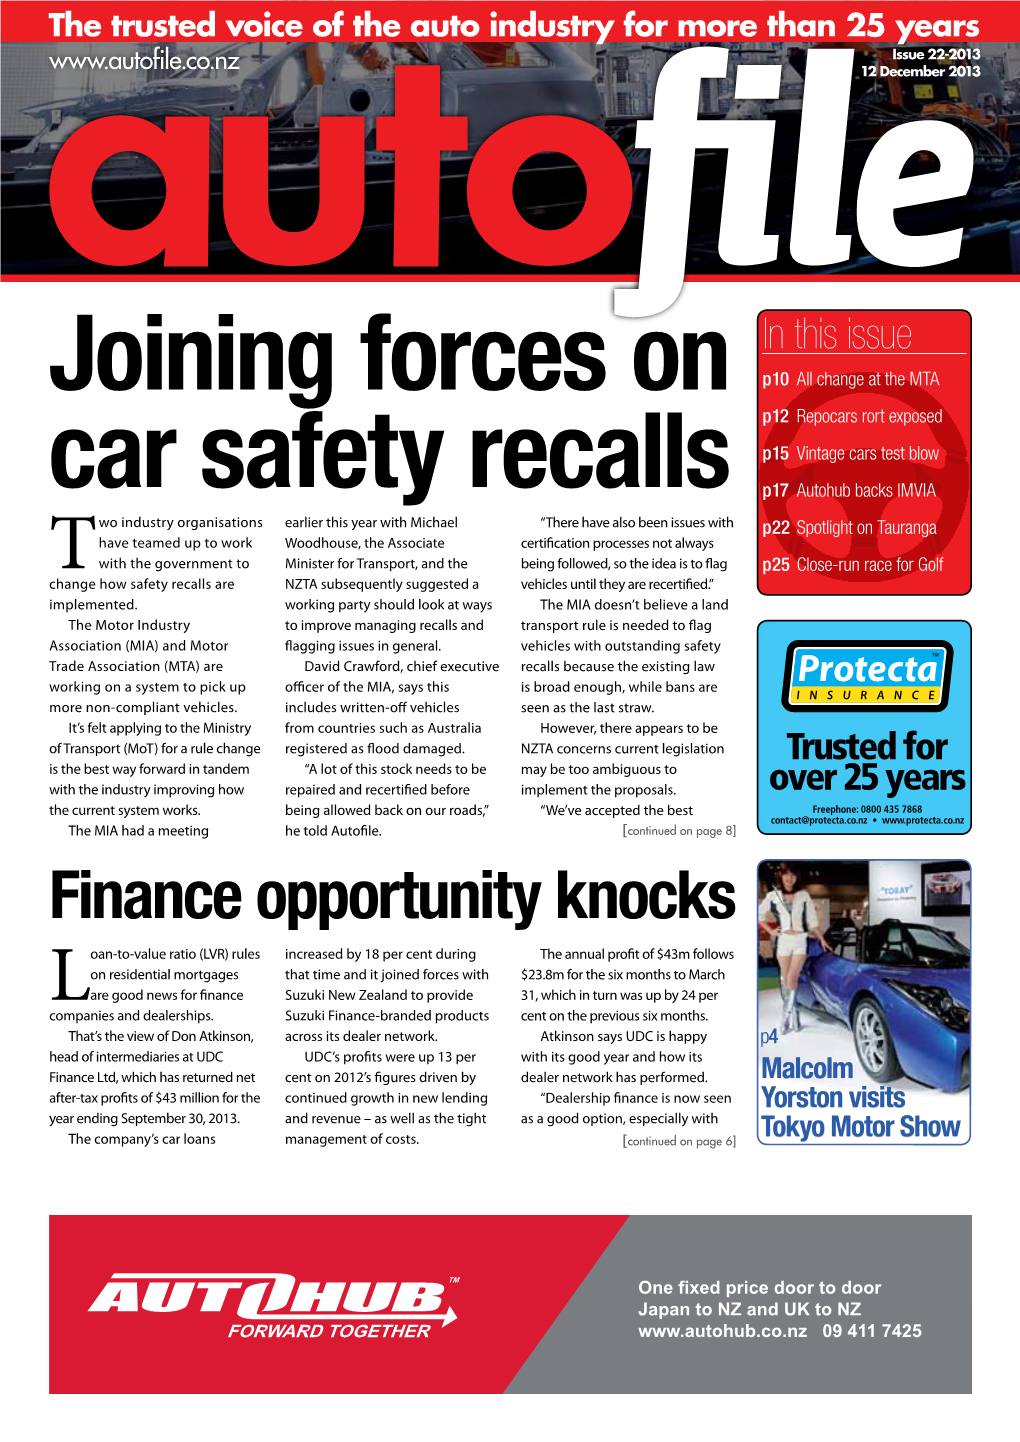 Joining Forces on Car Safety Recalls